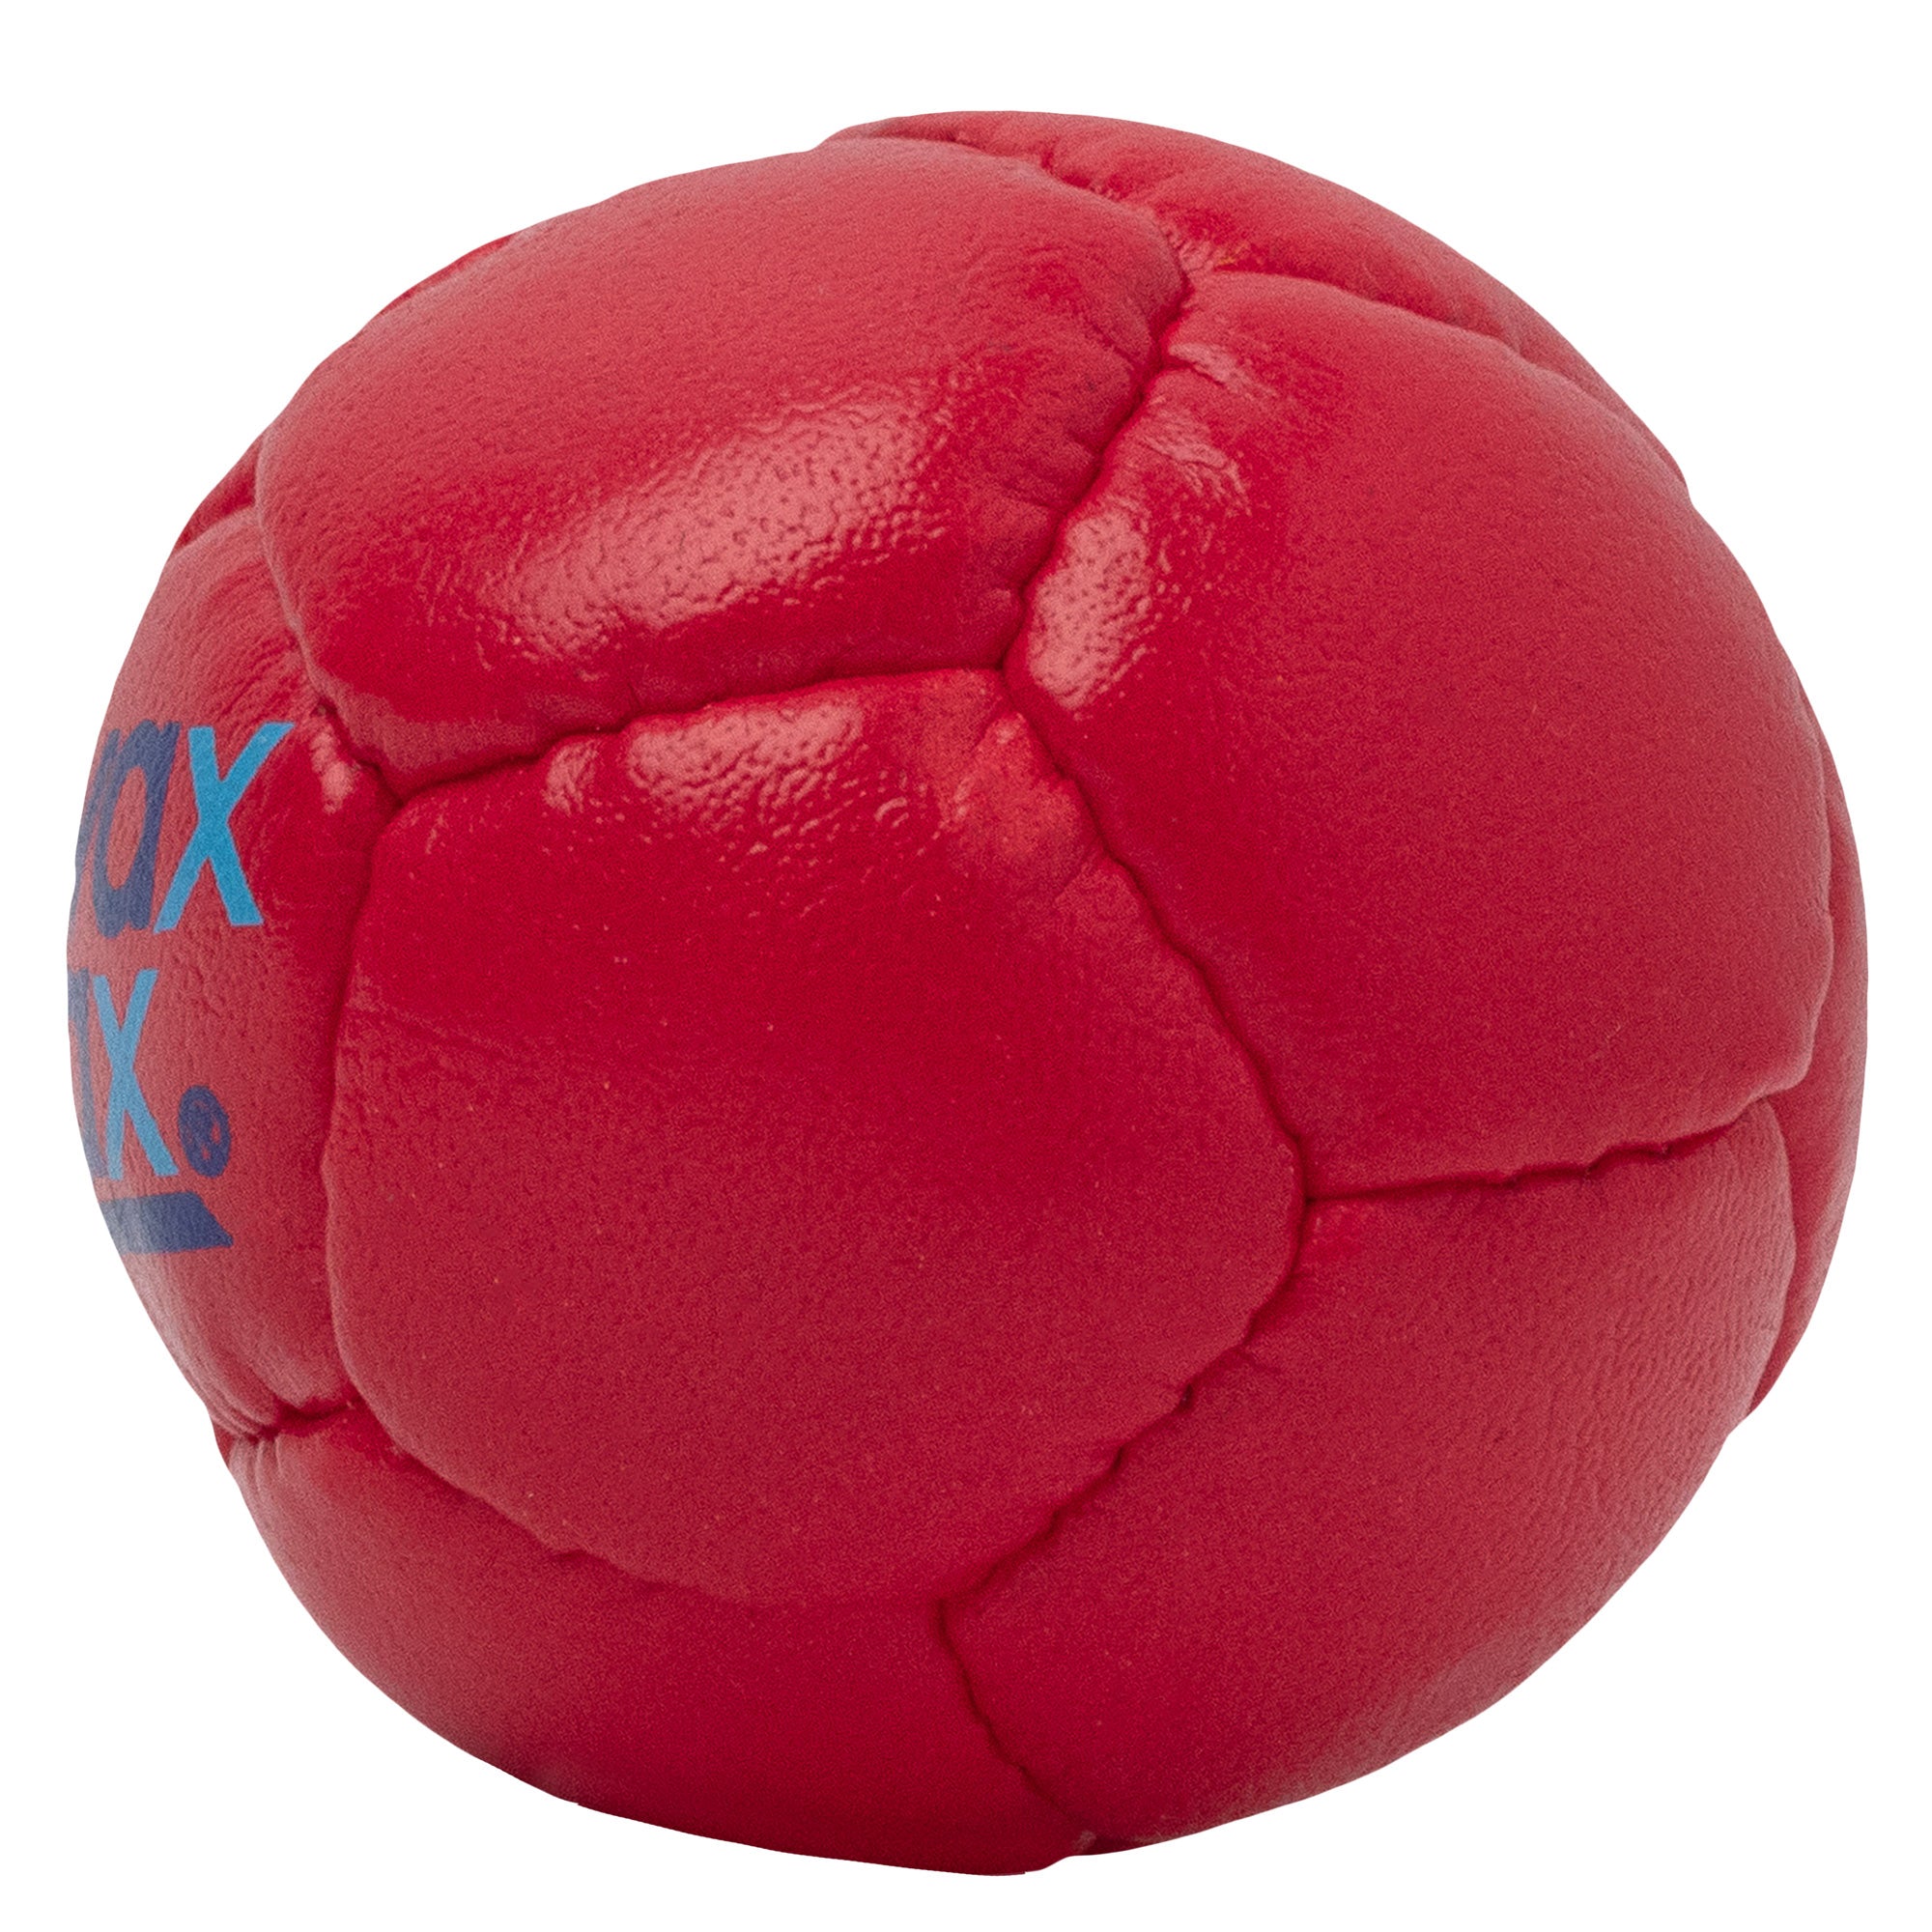 Red Swax Lax Lacrosse training ball - side view